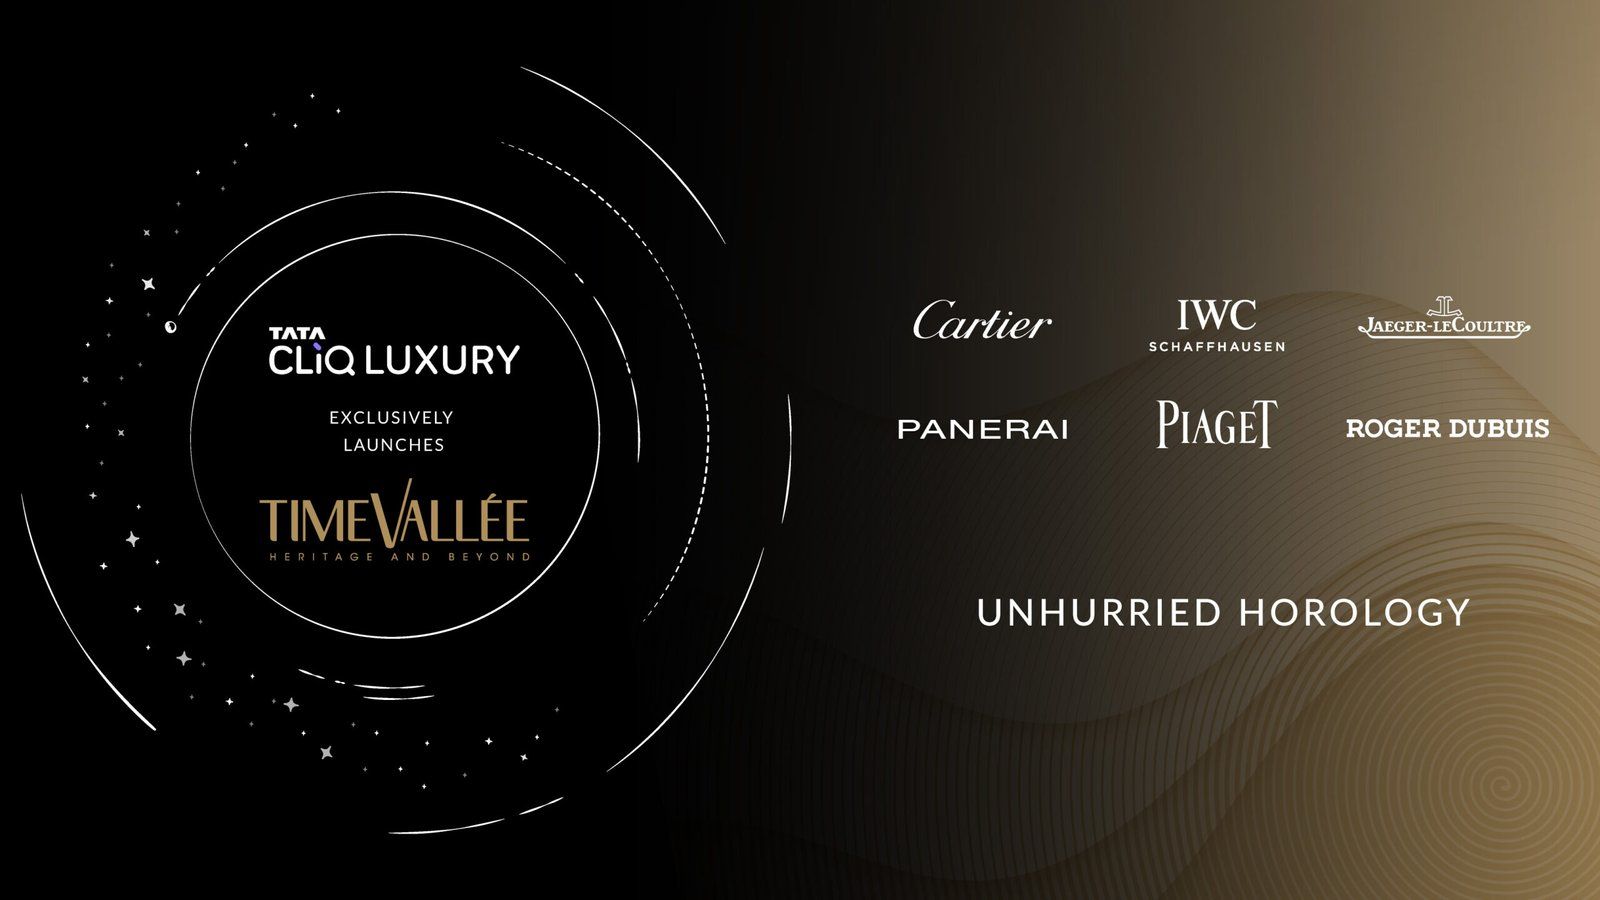 Tata CLiQ Luxury exclusively launches TimeVallée_s first digital boutique in India